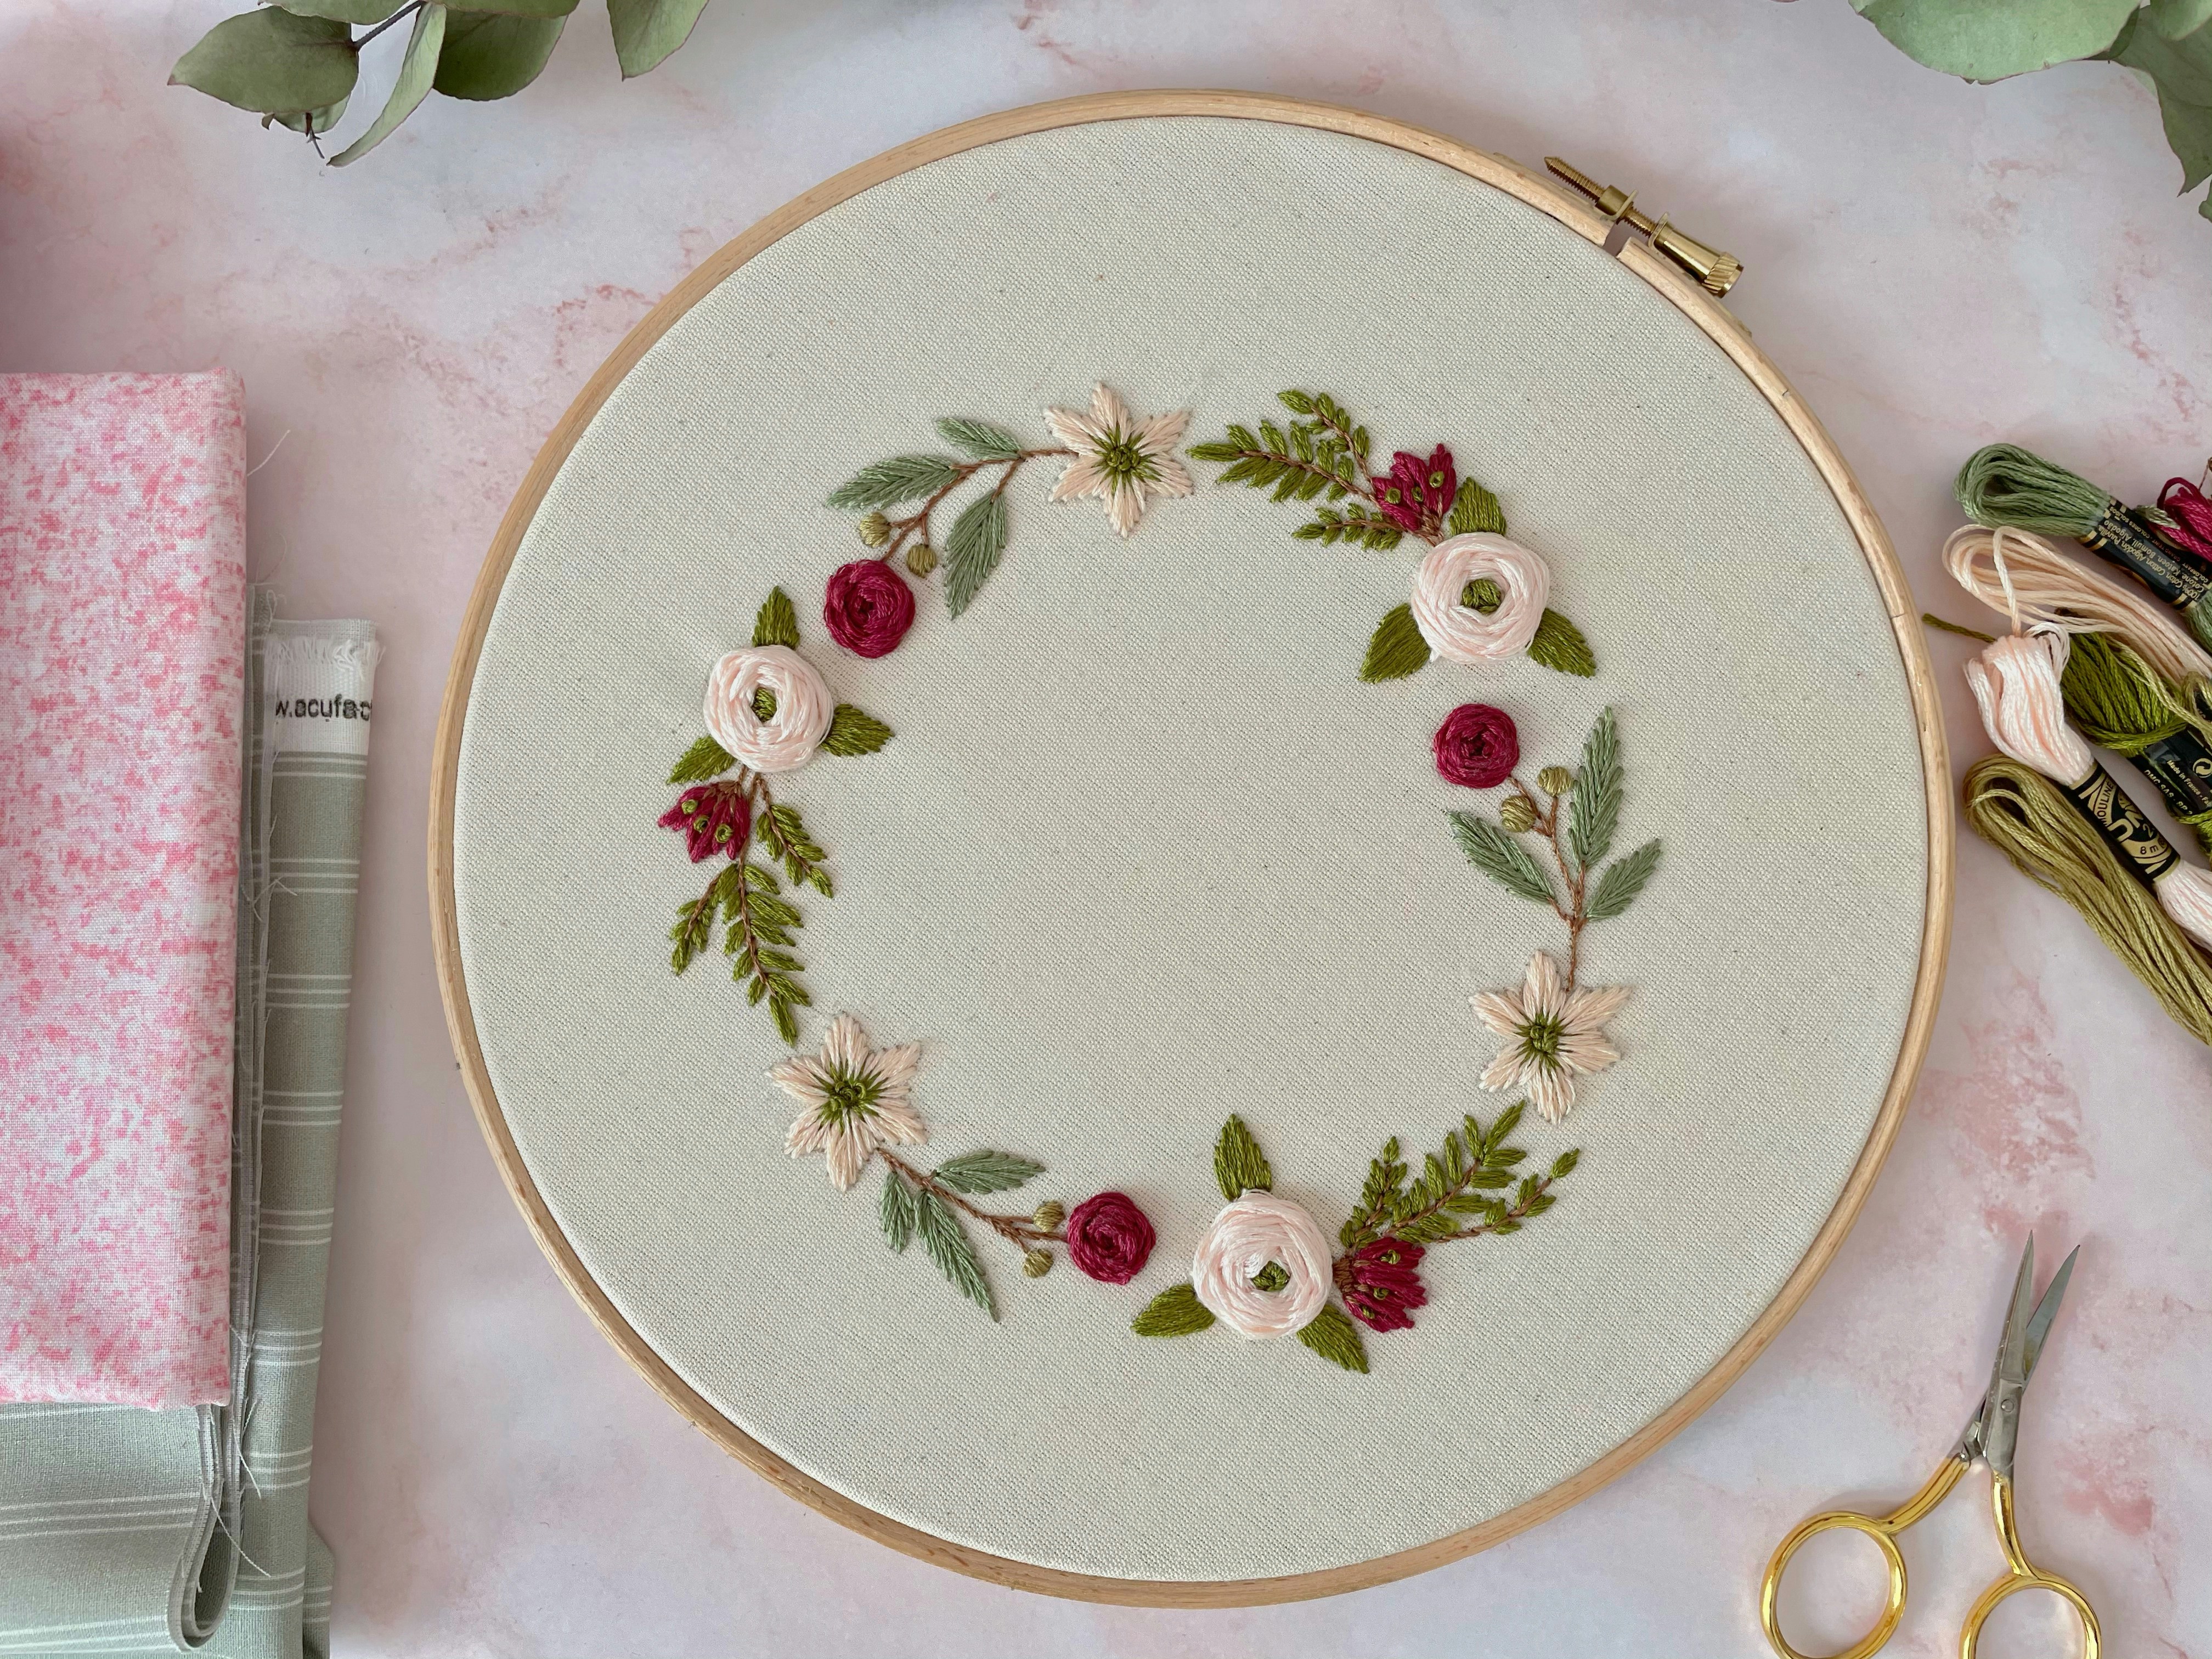 Exploring Different Embroidery Stitches for Beginners